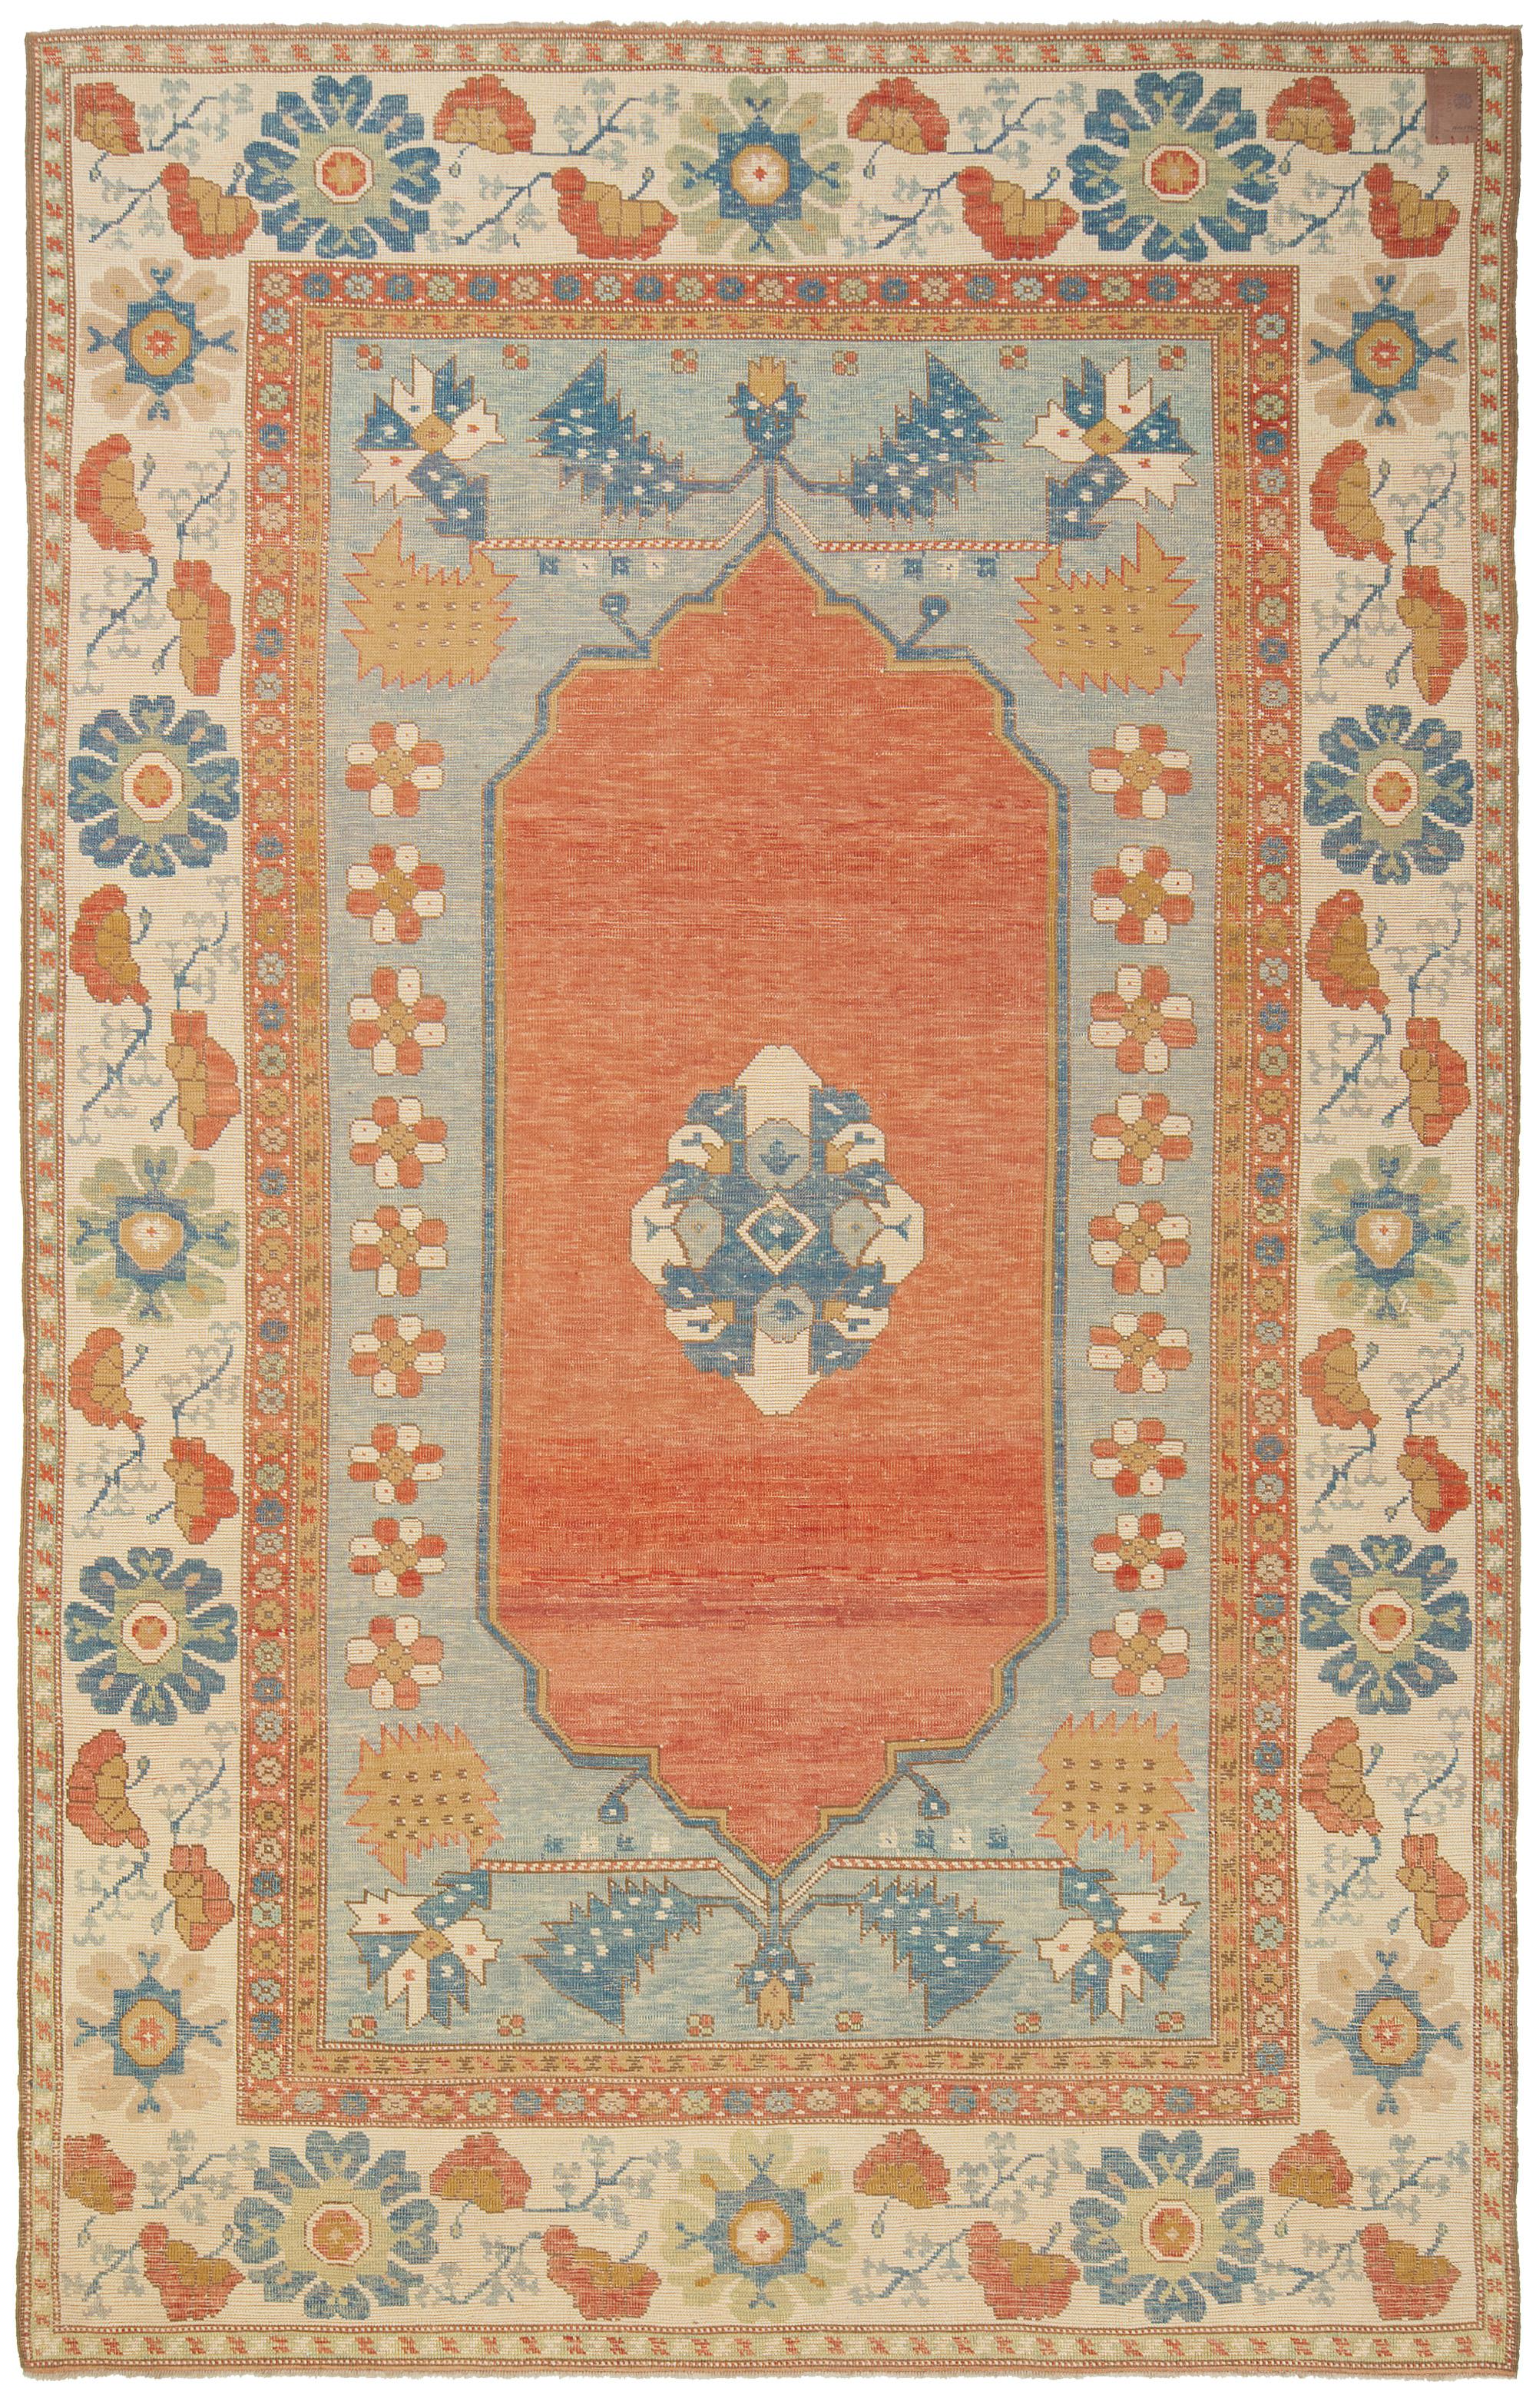 The source of the rug comes from the book Orient Star – A Carpet Collection, E. Heinrich Kirchheim, Hali Publications Ltd, 1993 nr.166. This is similar to Transylvanian carpets designed by an 18th century rug from West Turkey. This rug has blue